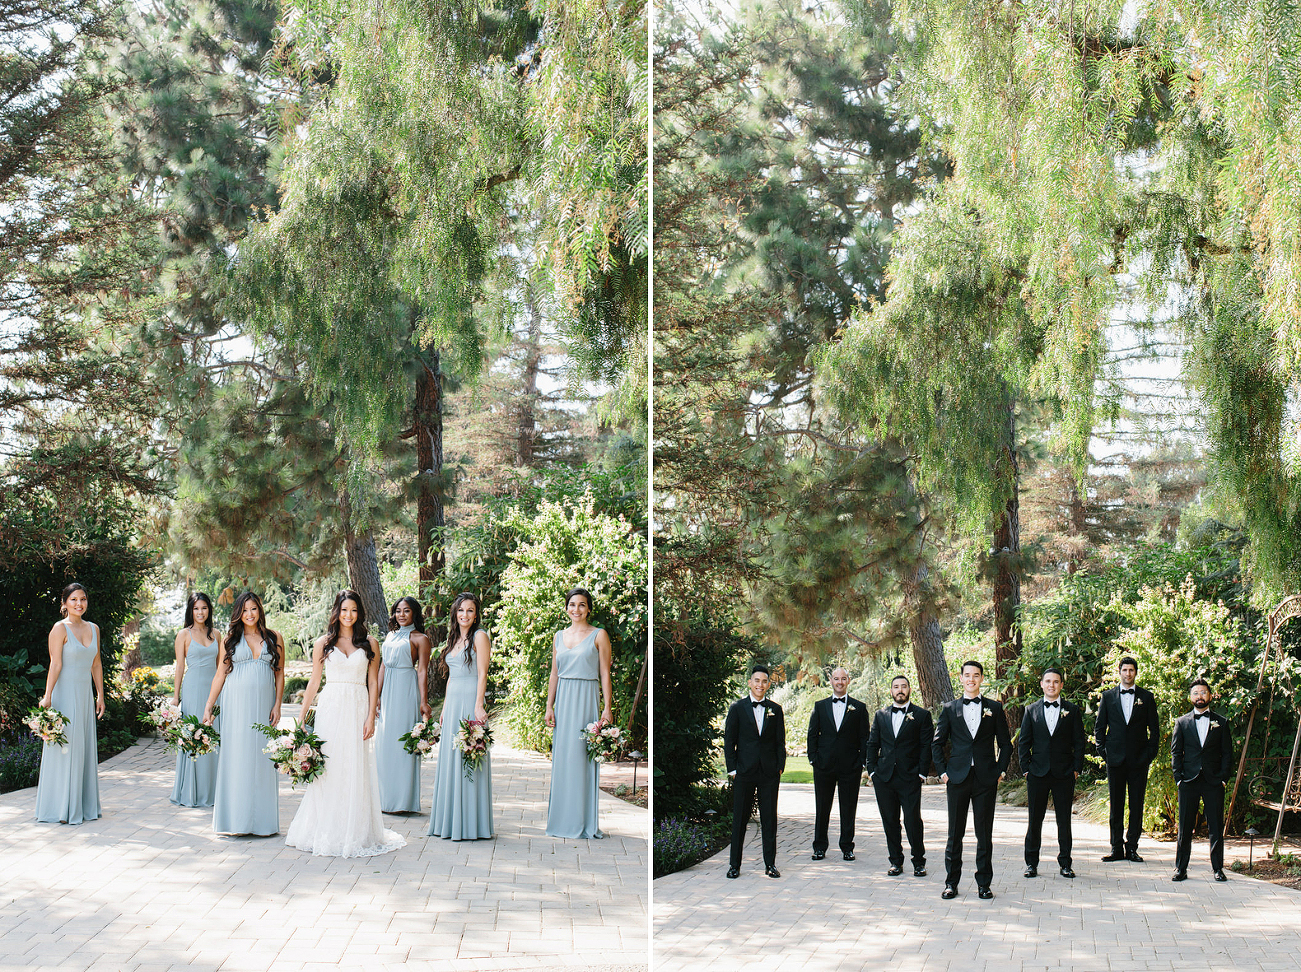 Two photos - bridesmaids with the bride and groomsmen with the groom. Blue dresses and black tuxes